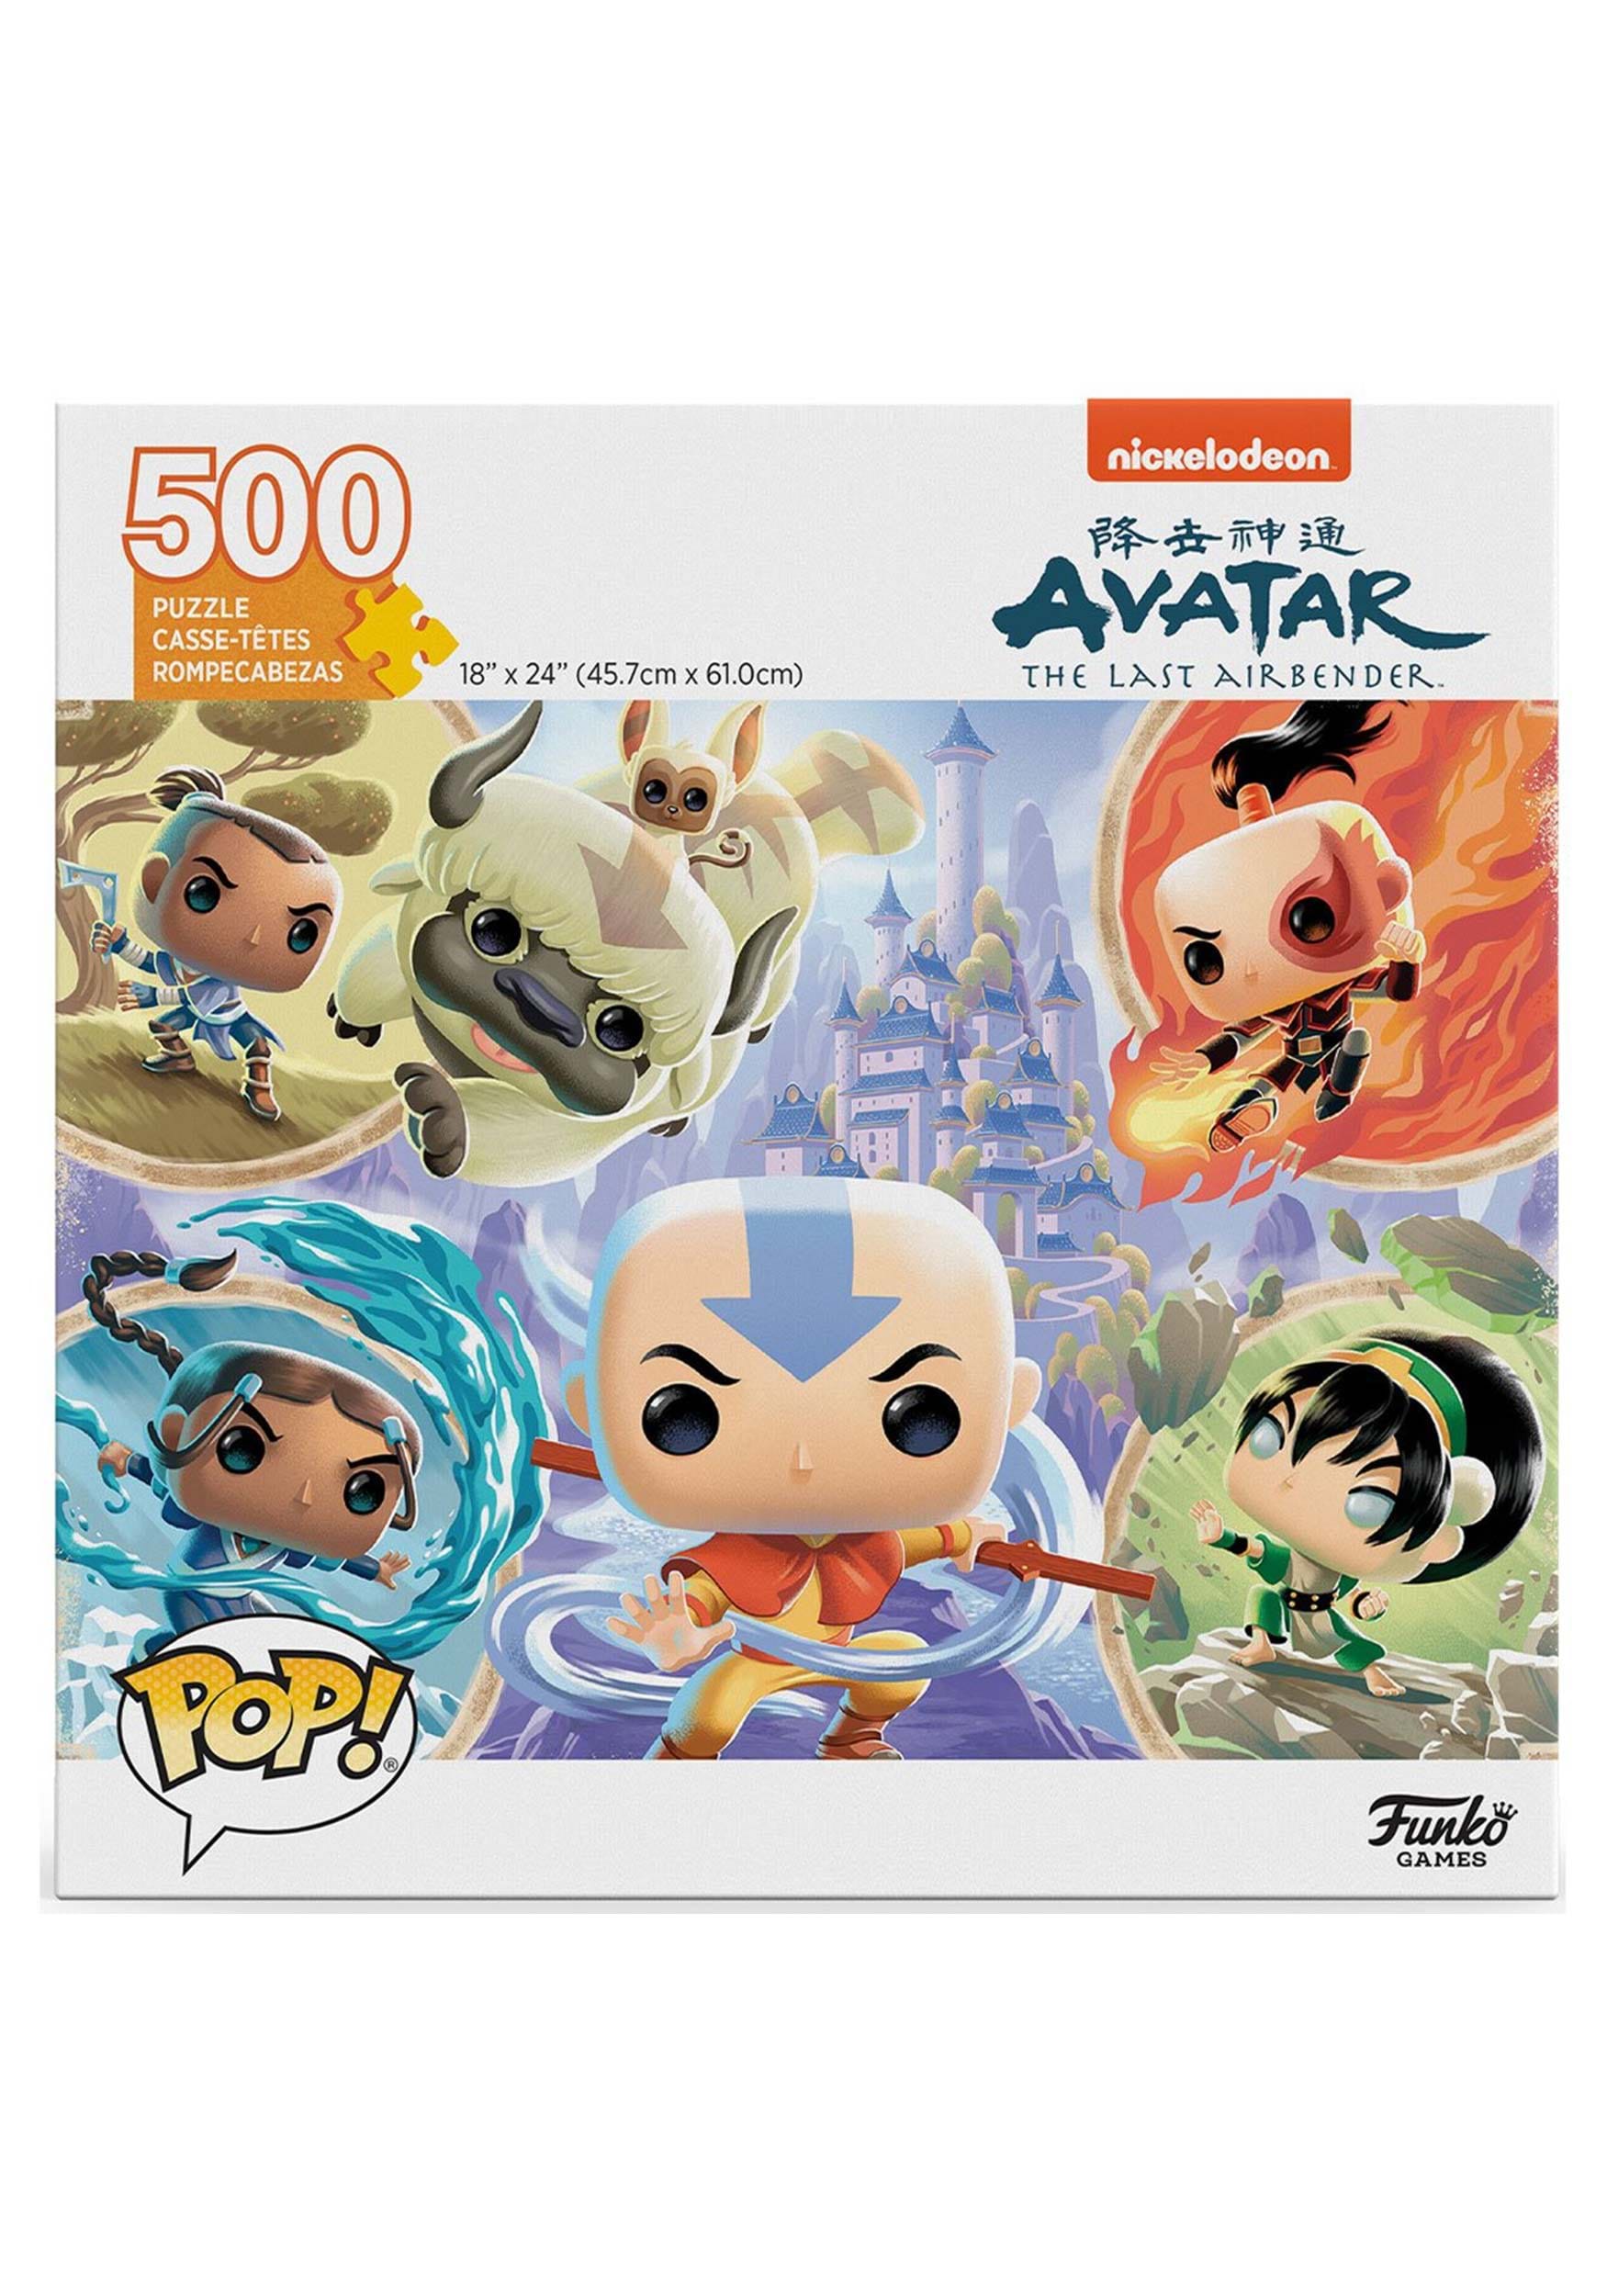 Avatar The Last Airbender 500 Piece POP! Puzzle , Jigsaw Puzzles